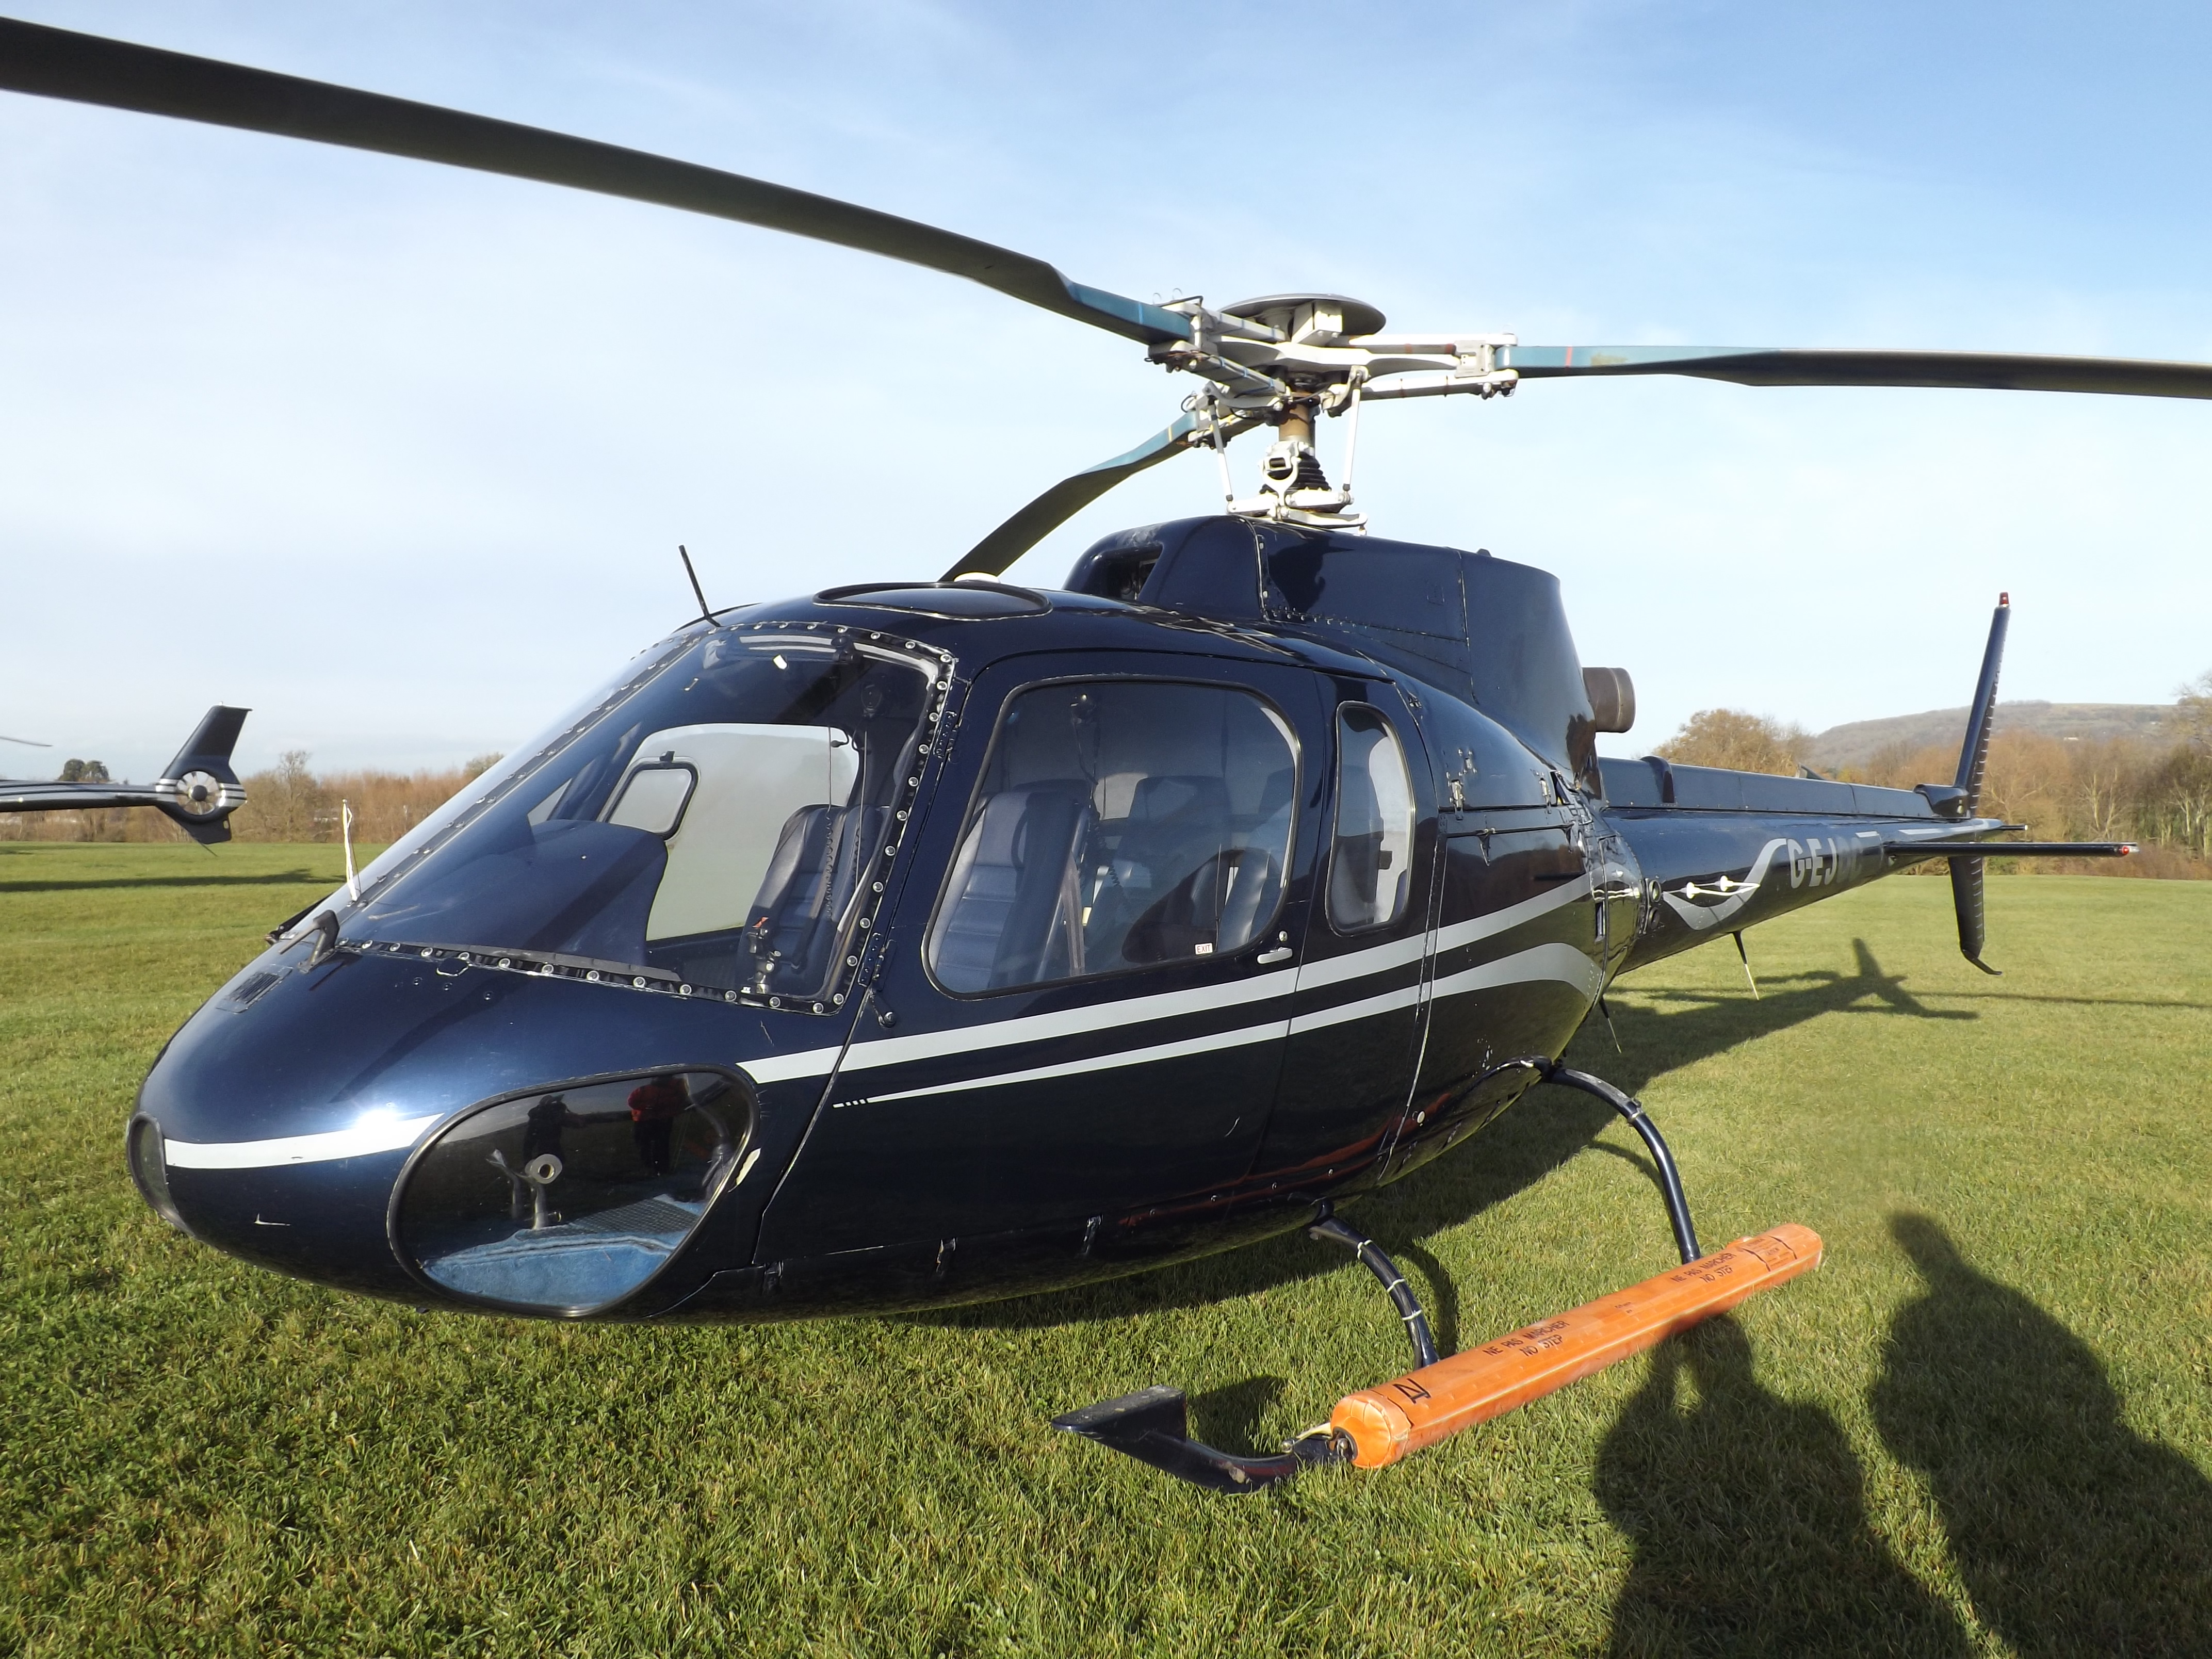 Important Safety Considerations for Choosing a Private Helicopter